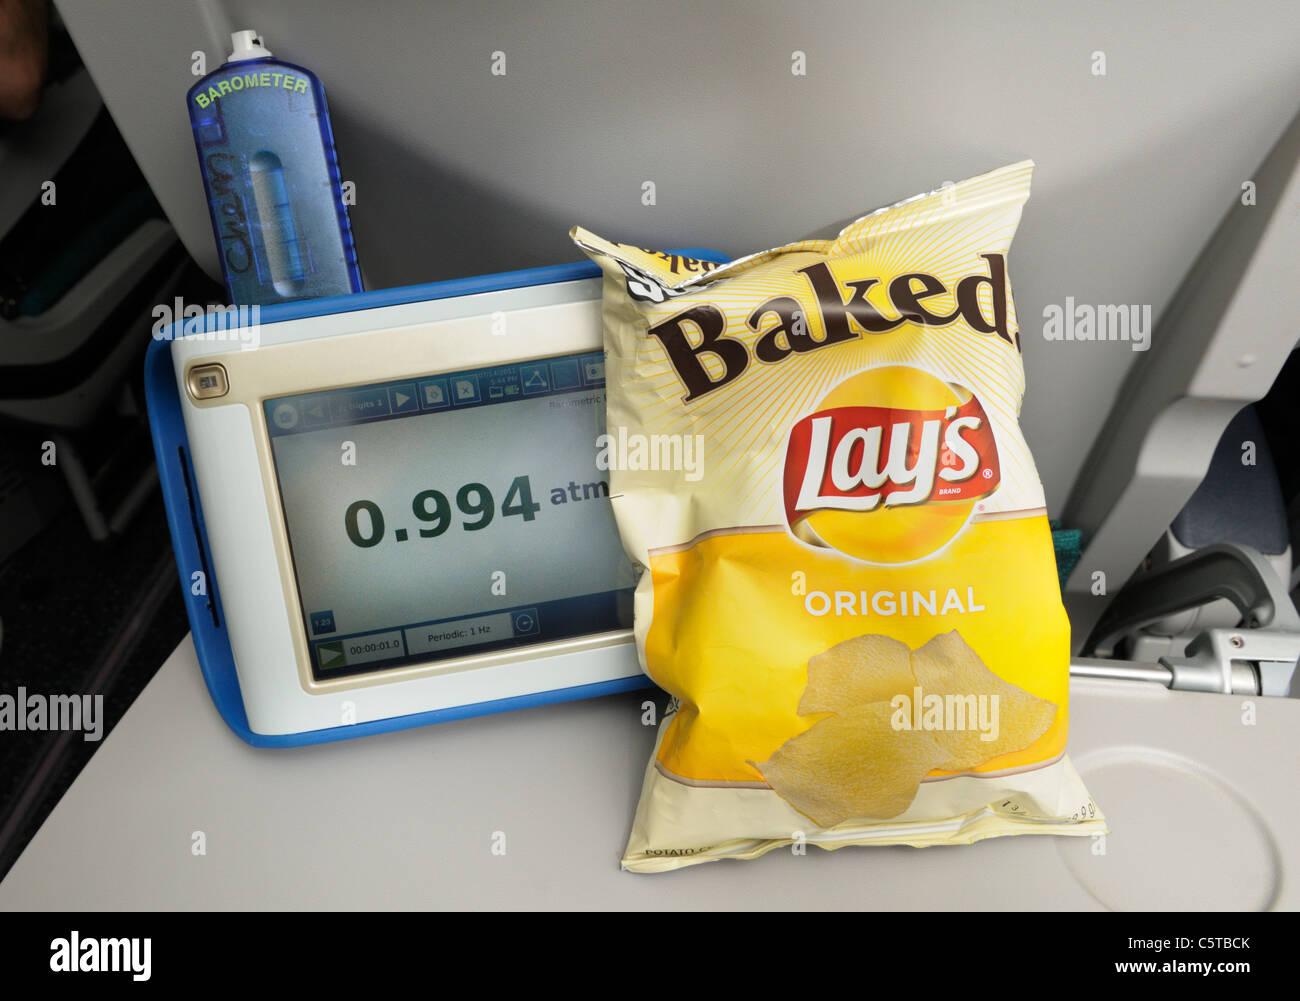 Chip bag on an airplane at sea level. Image # C5TBEA shows the same bag puffed up by lower atmospheric pressure at high altitude Stock Photo